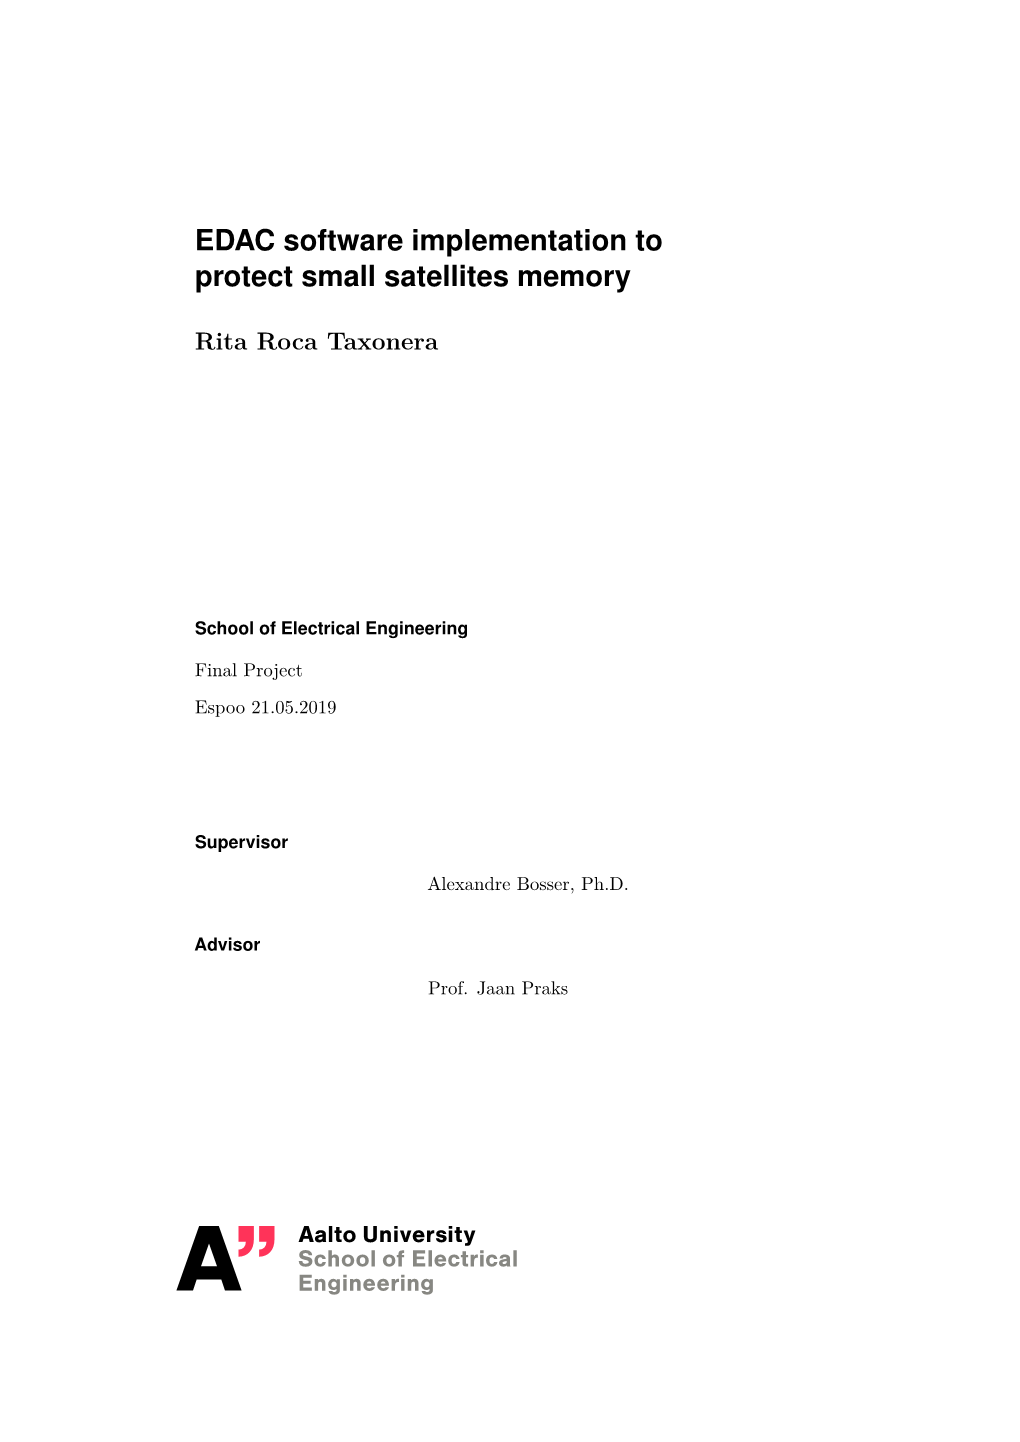 EDAC Software Implementation to Protect Small Satellites Memory